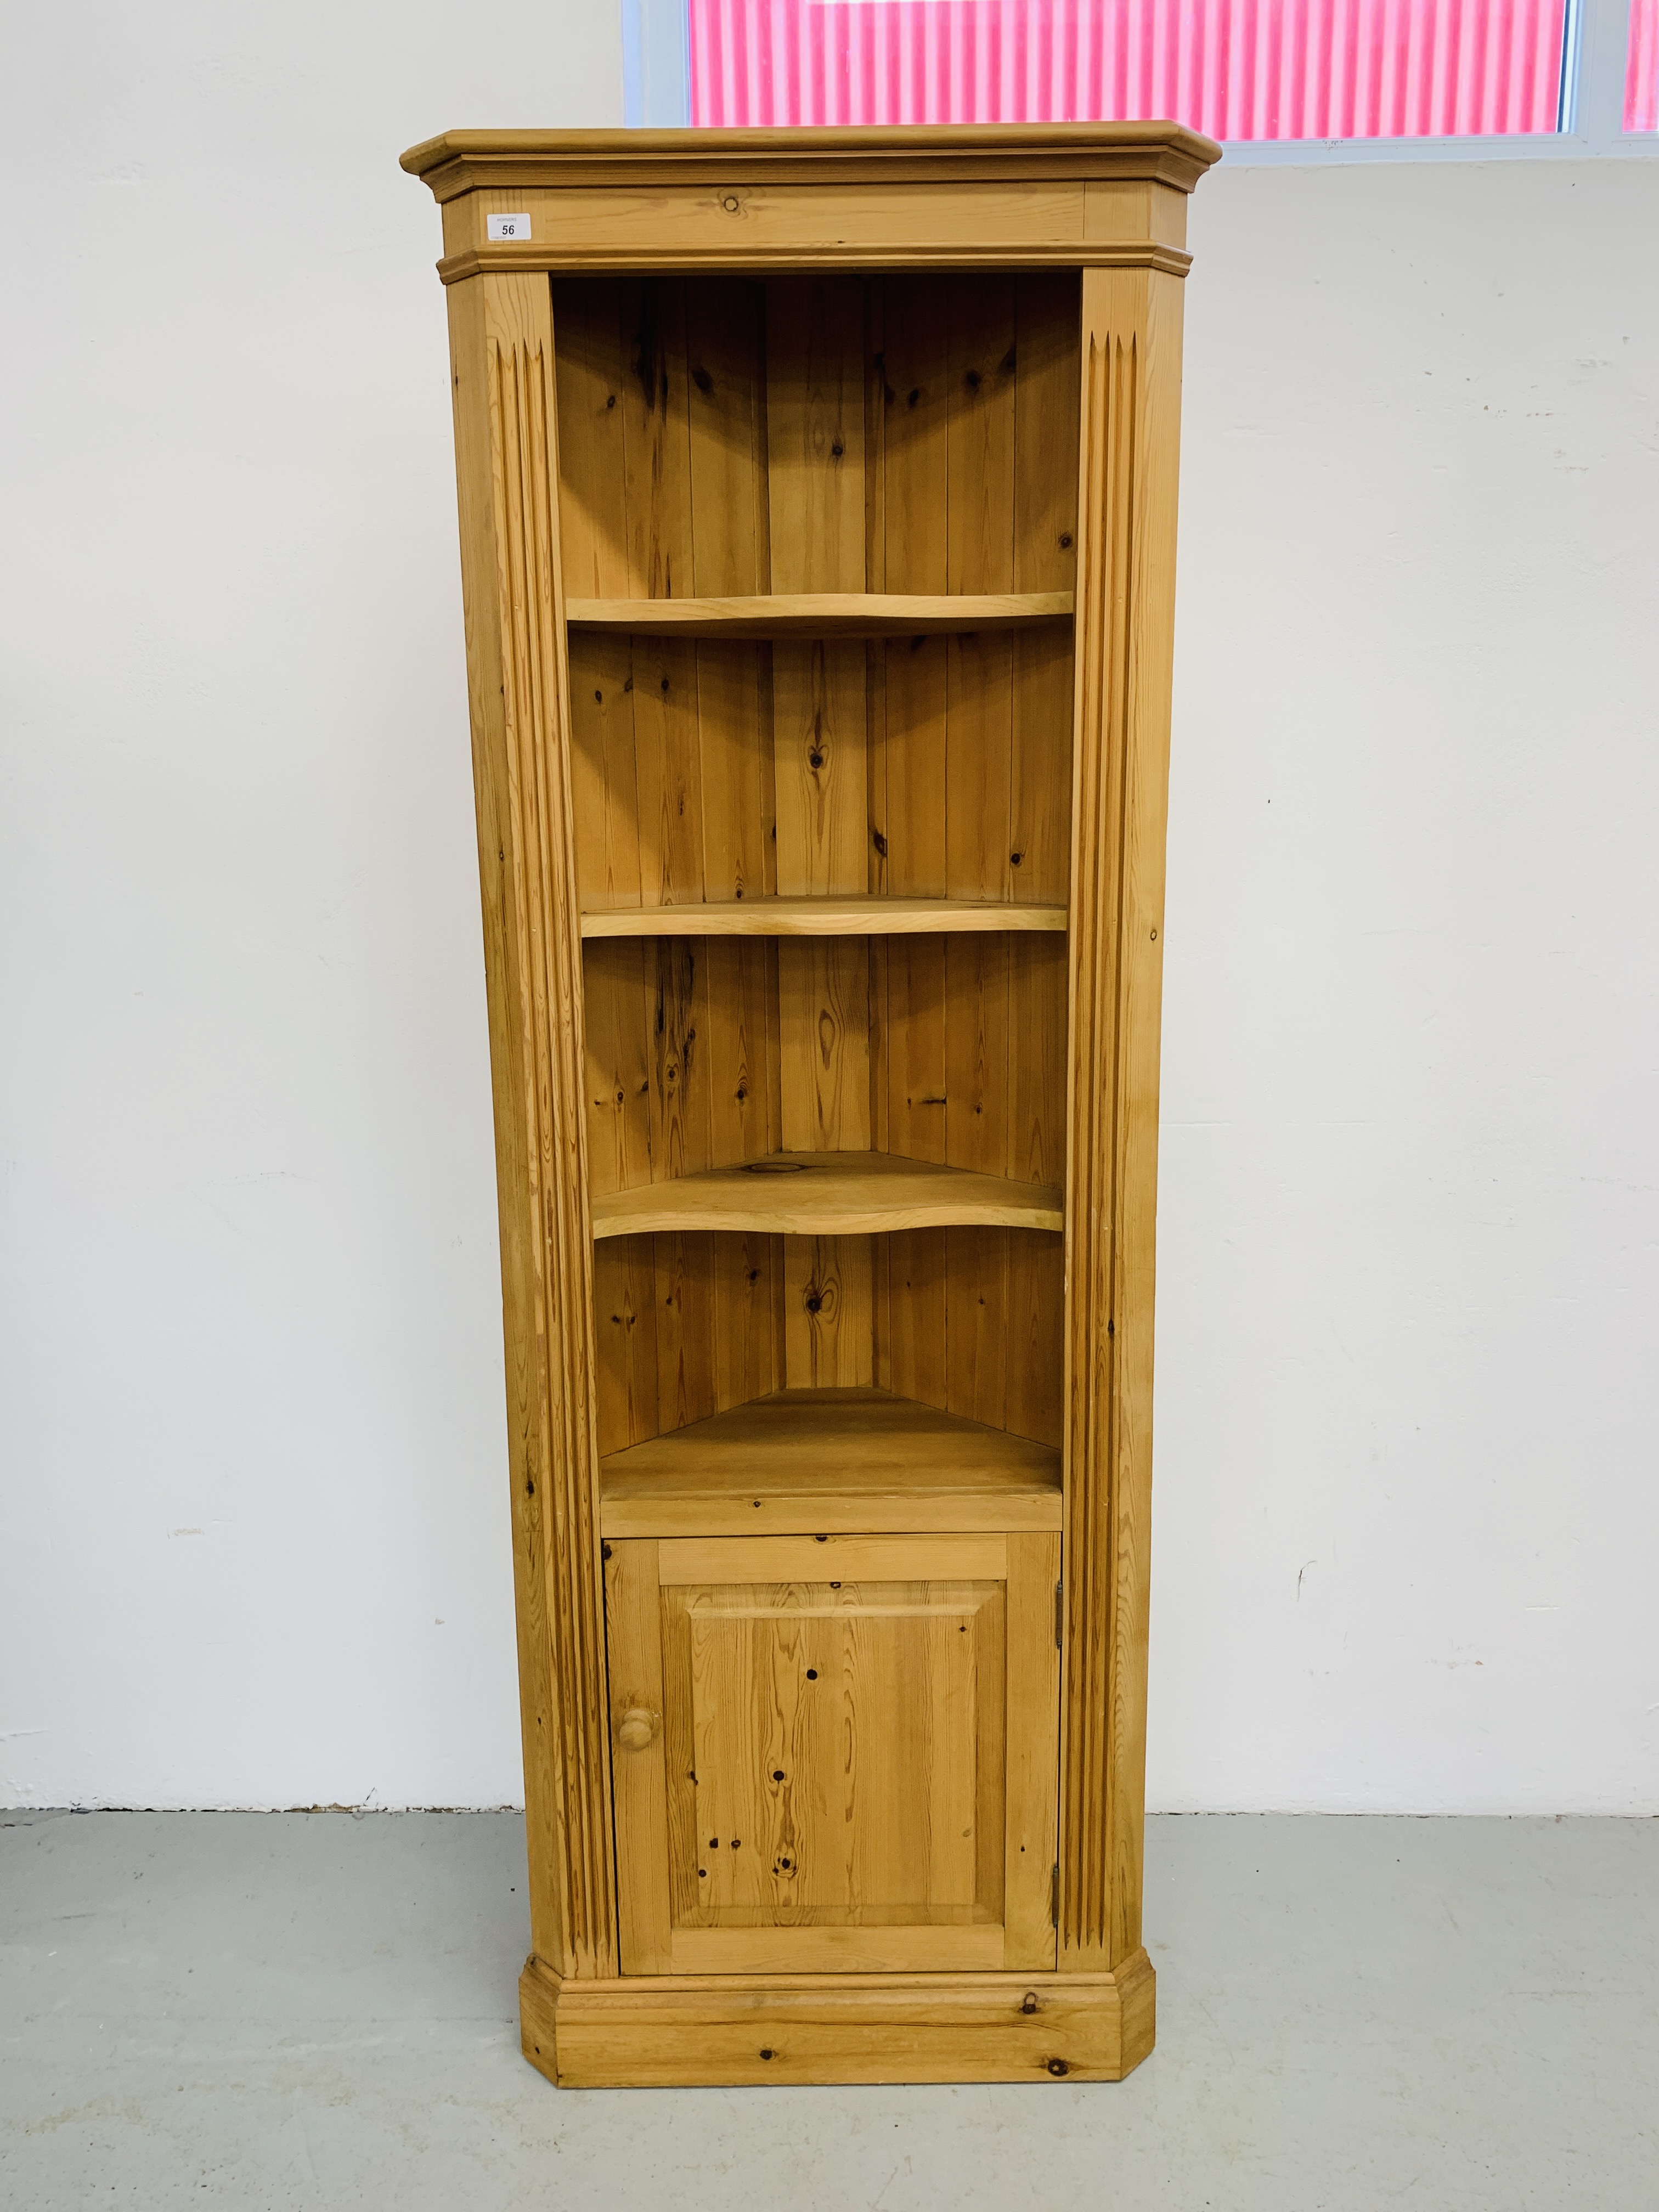 A WAXED PINE FULL HEIGHT CORNER SHELF UNIT WITH CABINET TO BASE H 198CM,